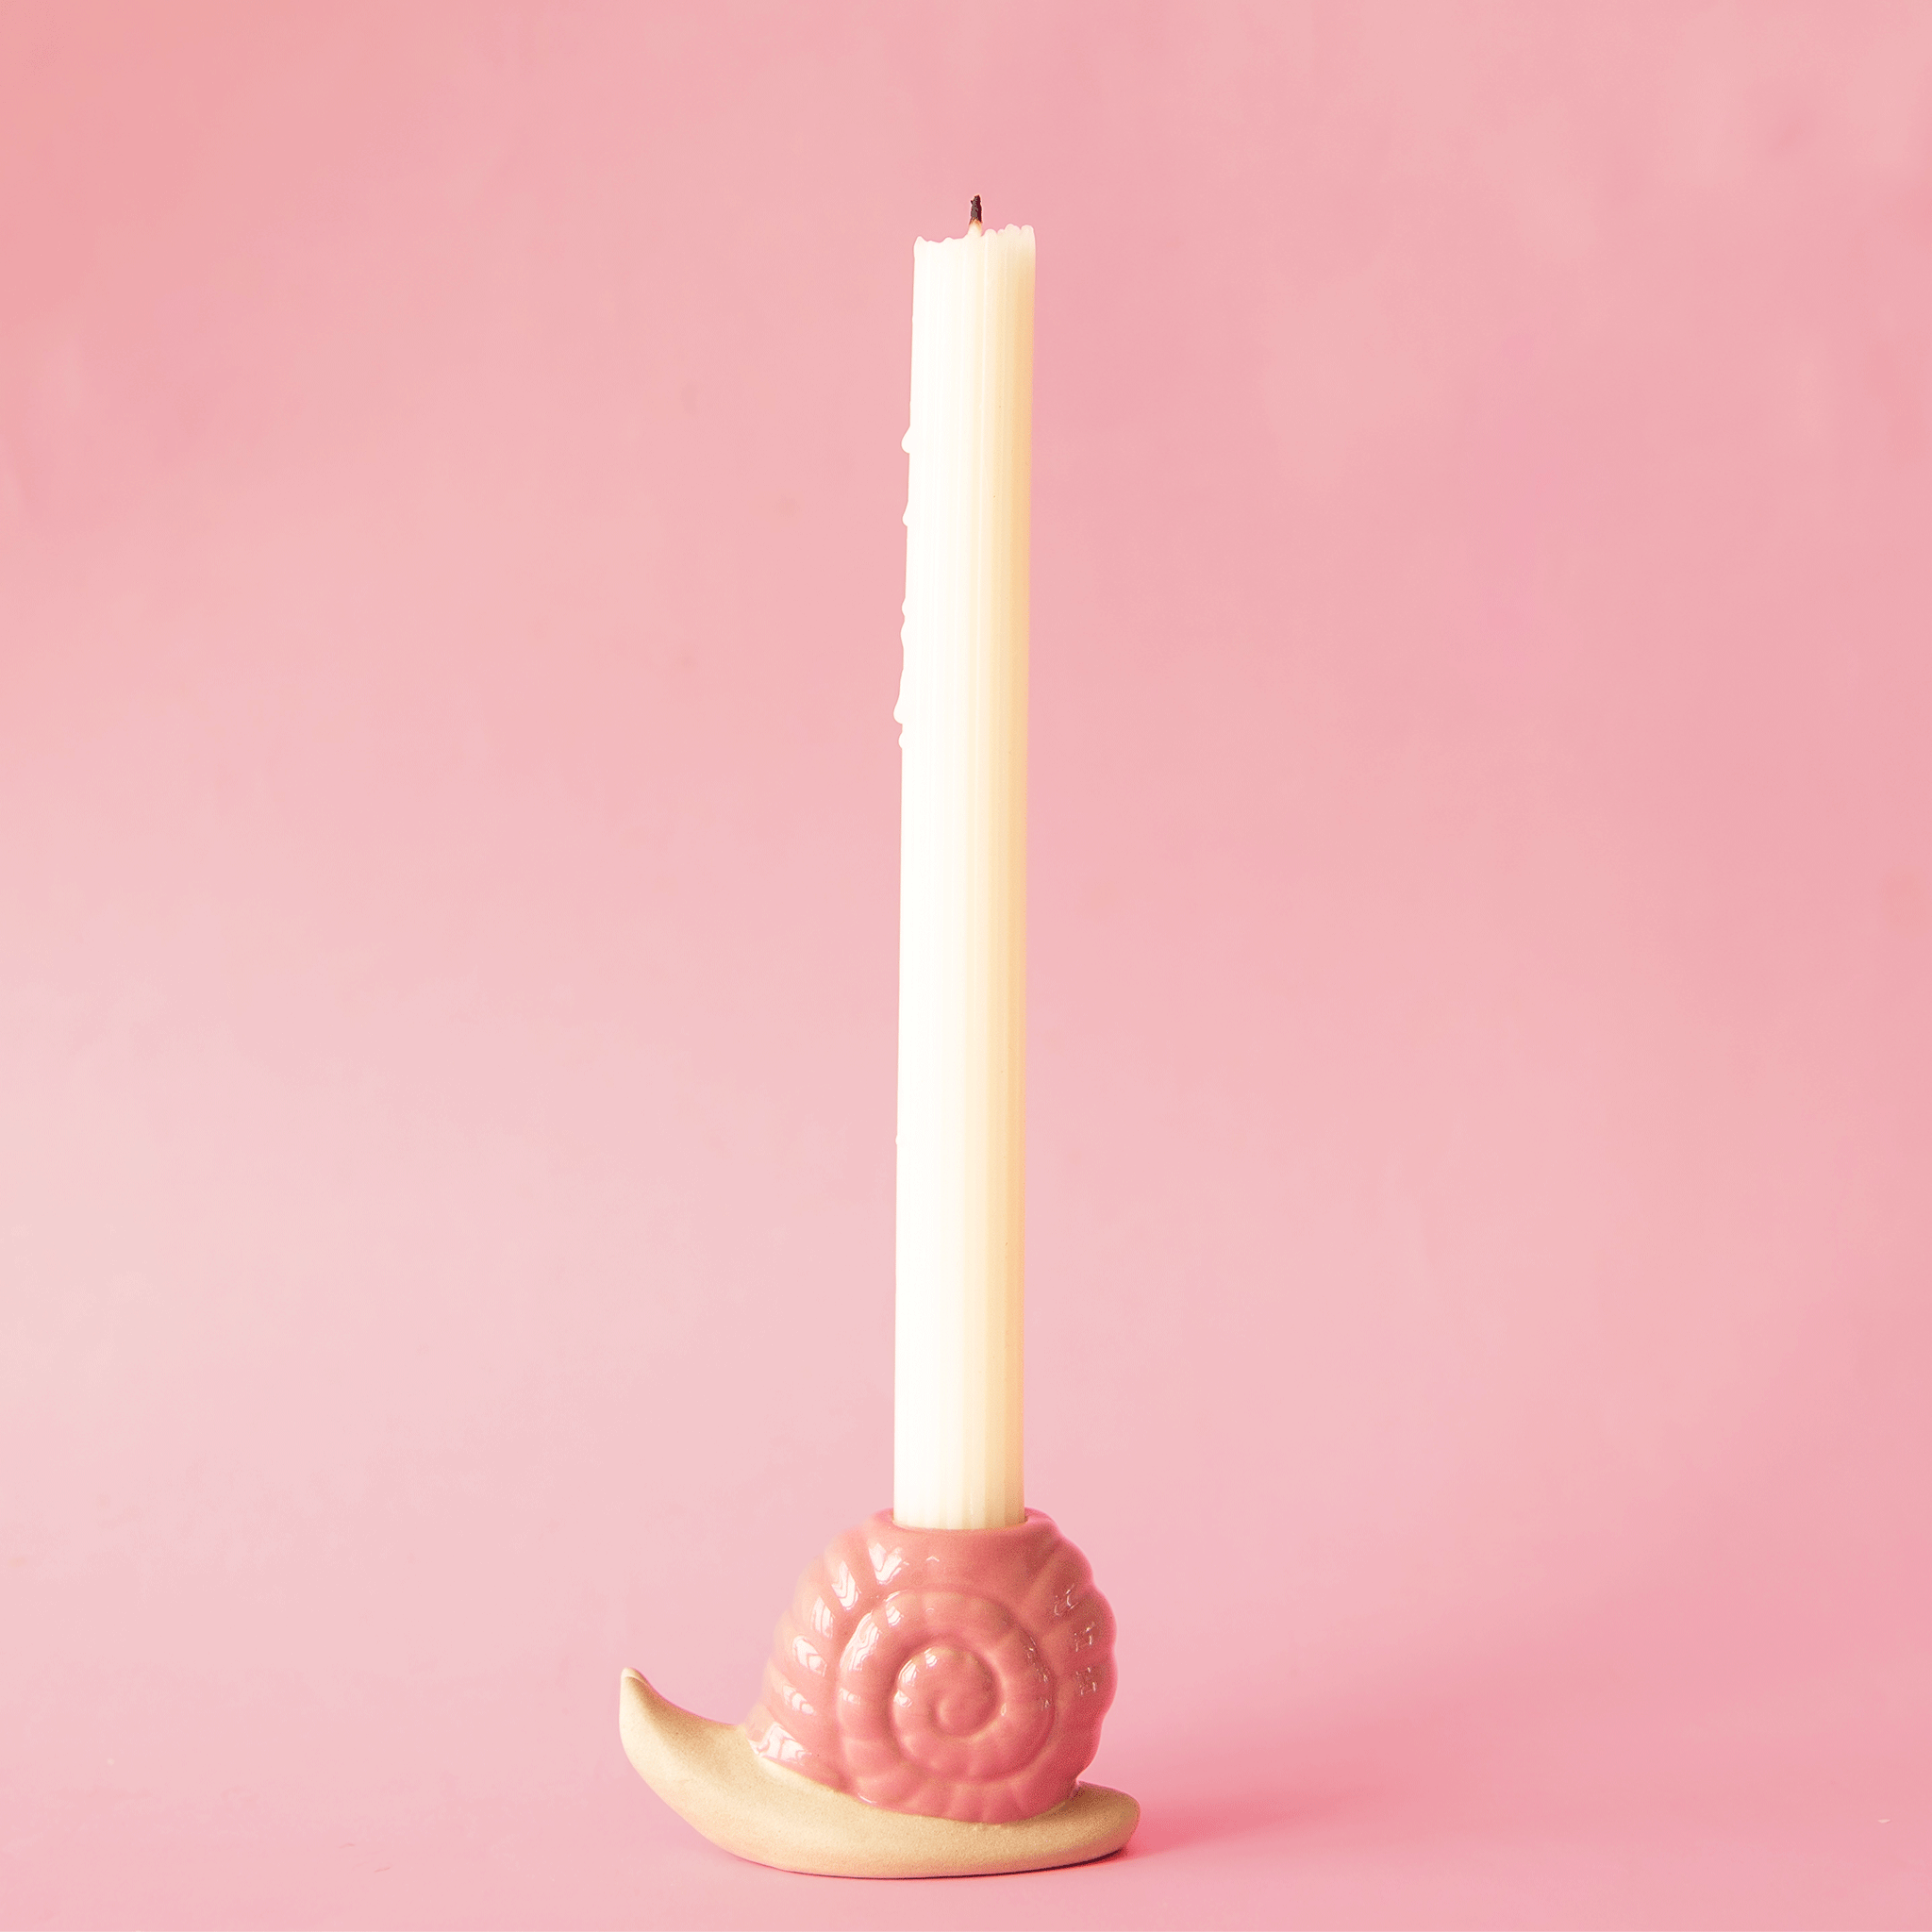 On a pink background is a ceramic pink snail shaped candle holder.